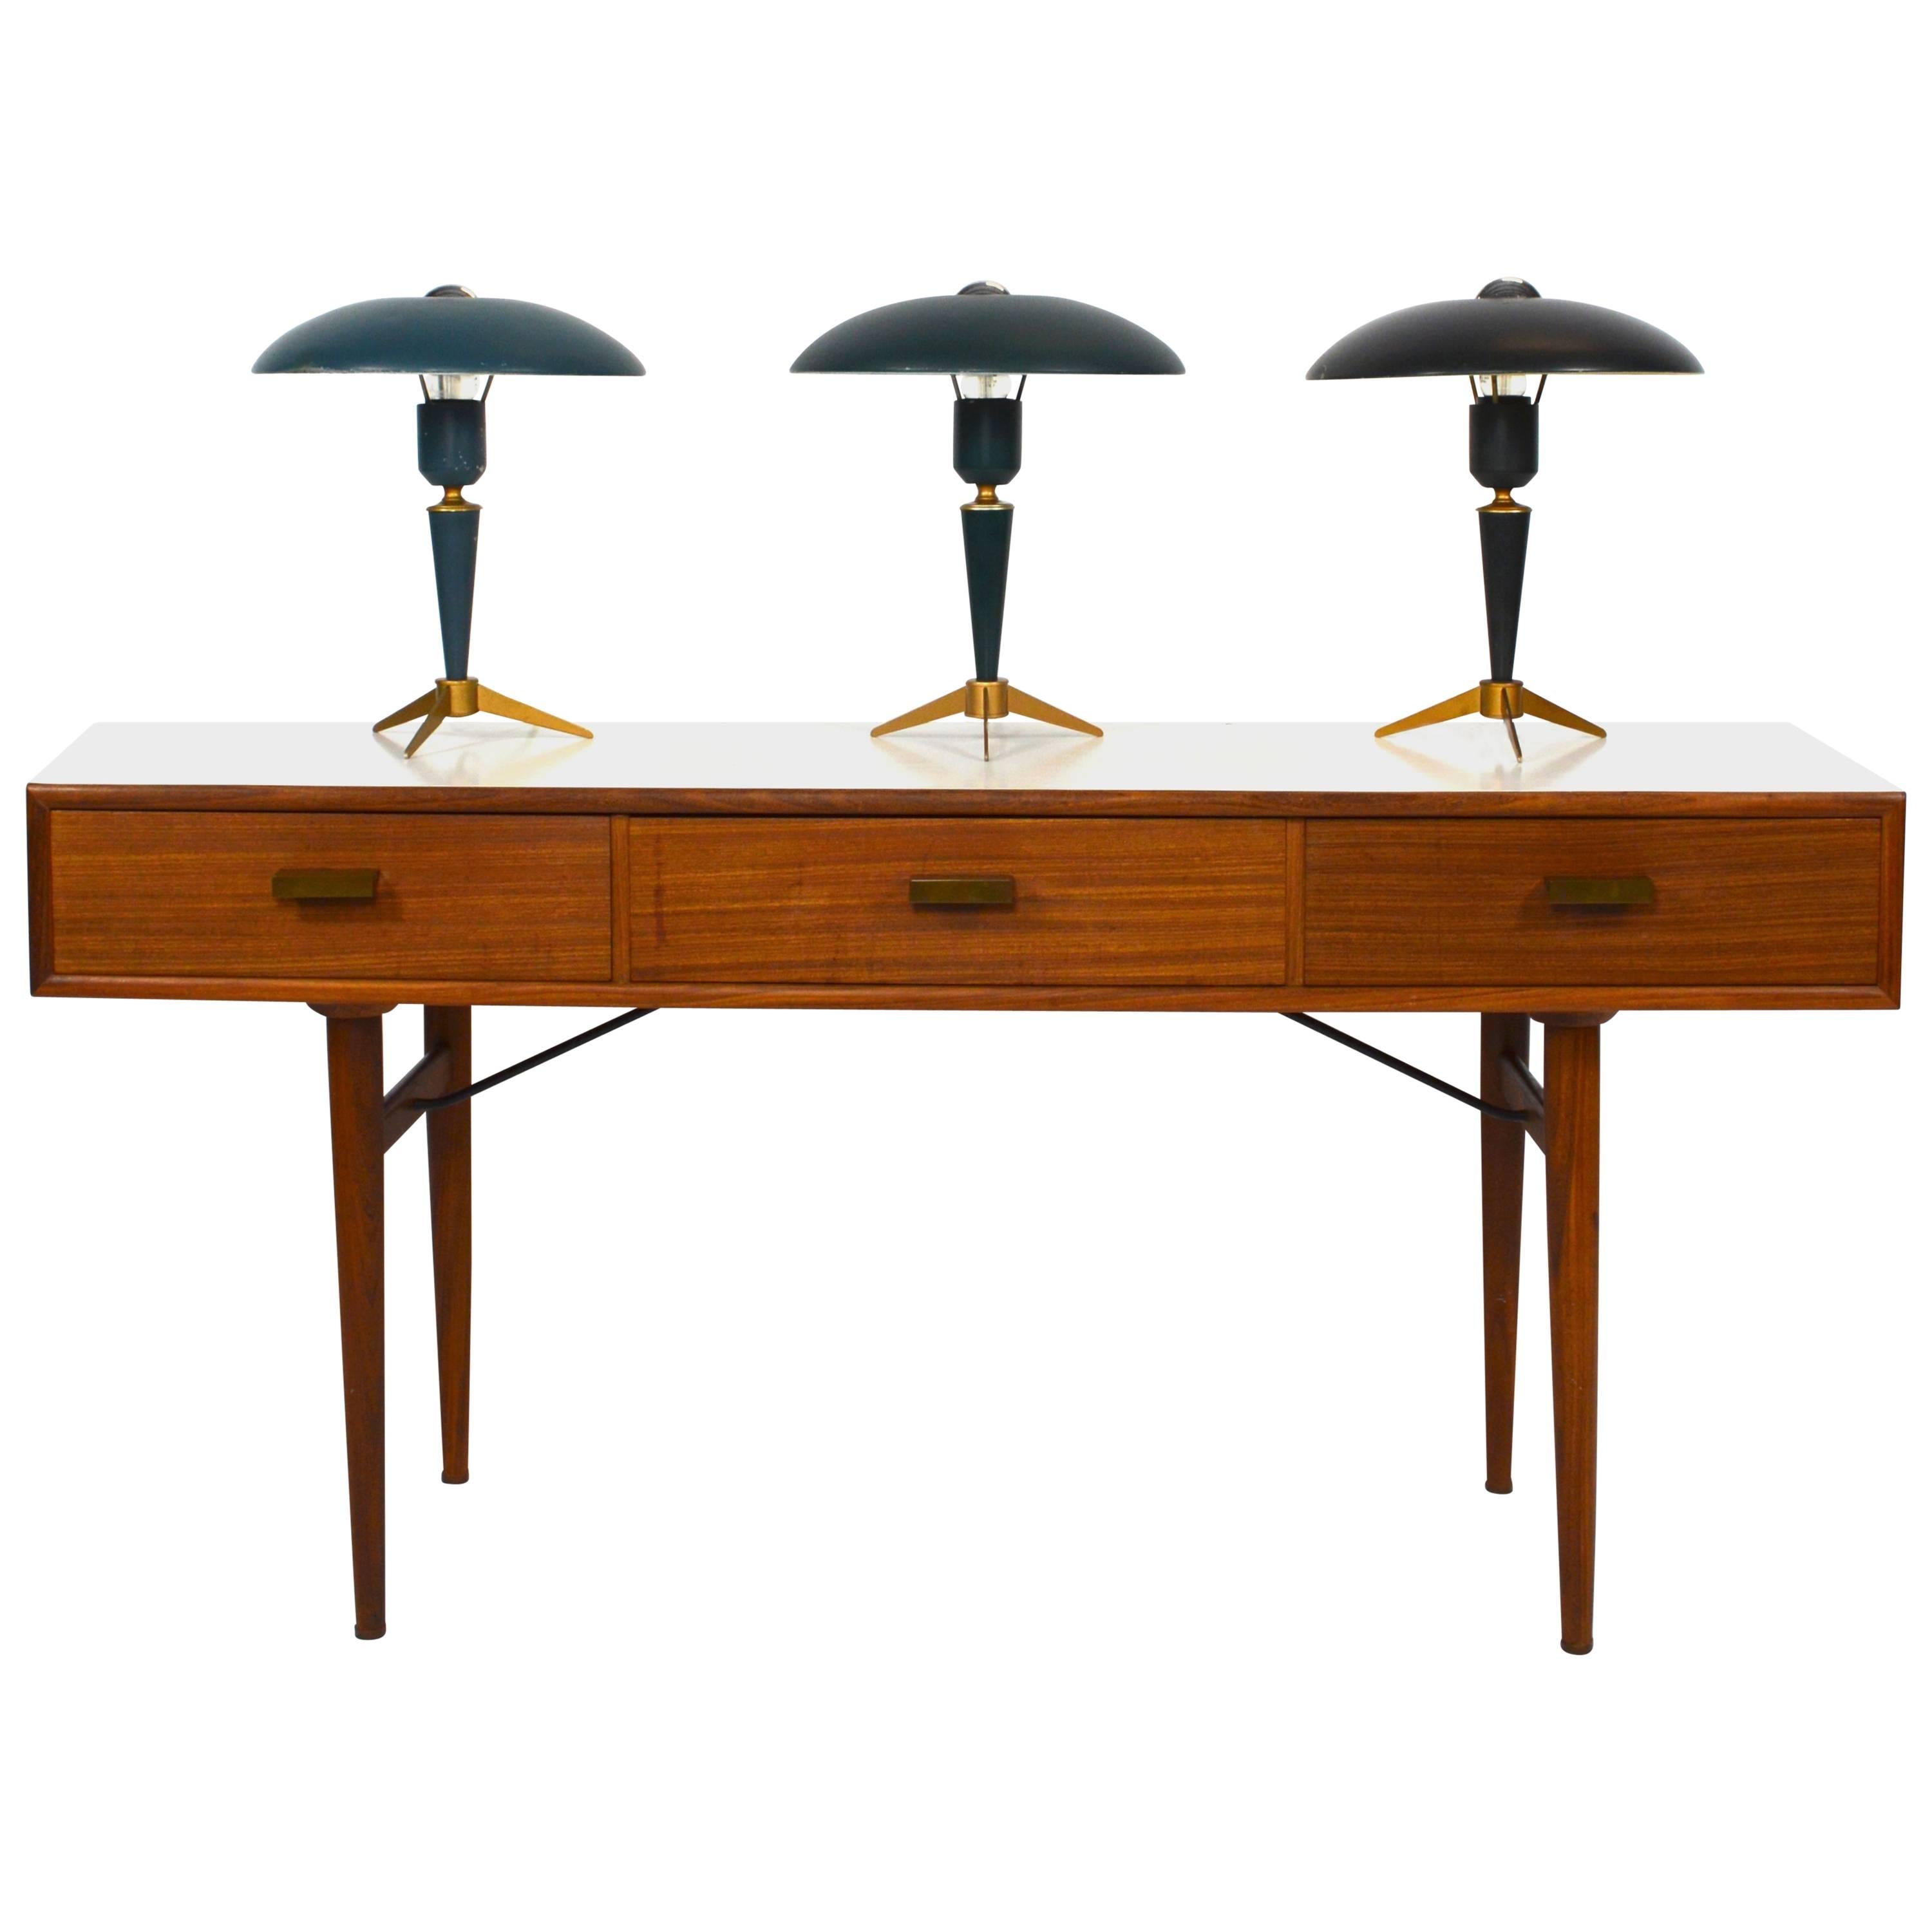 Set of Three Louis Kalff for Philips Table Lamps, Netherlands, 1958